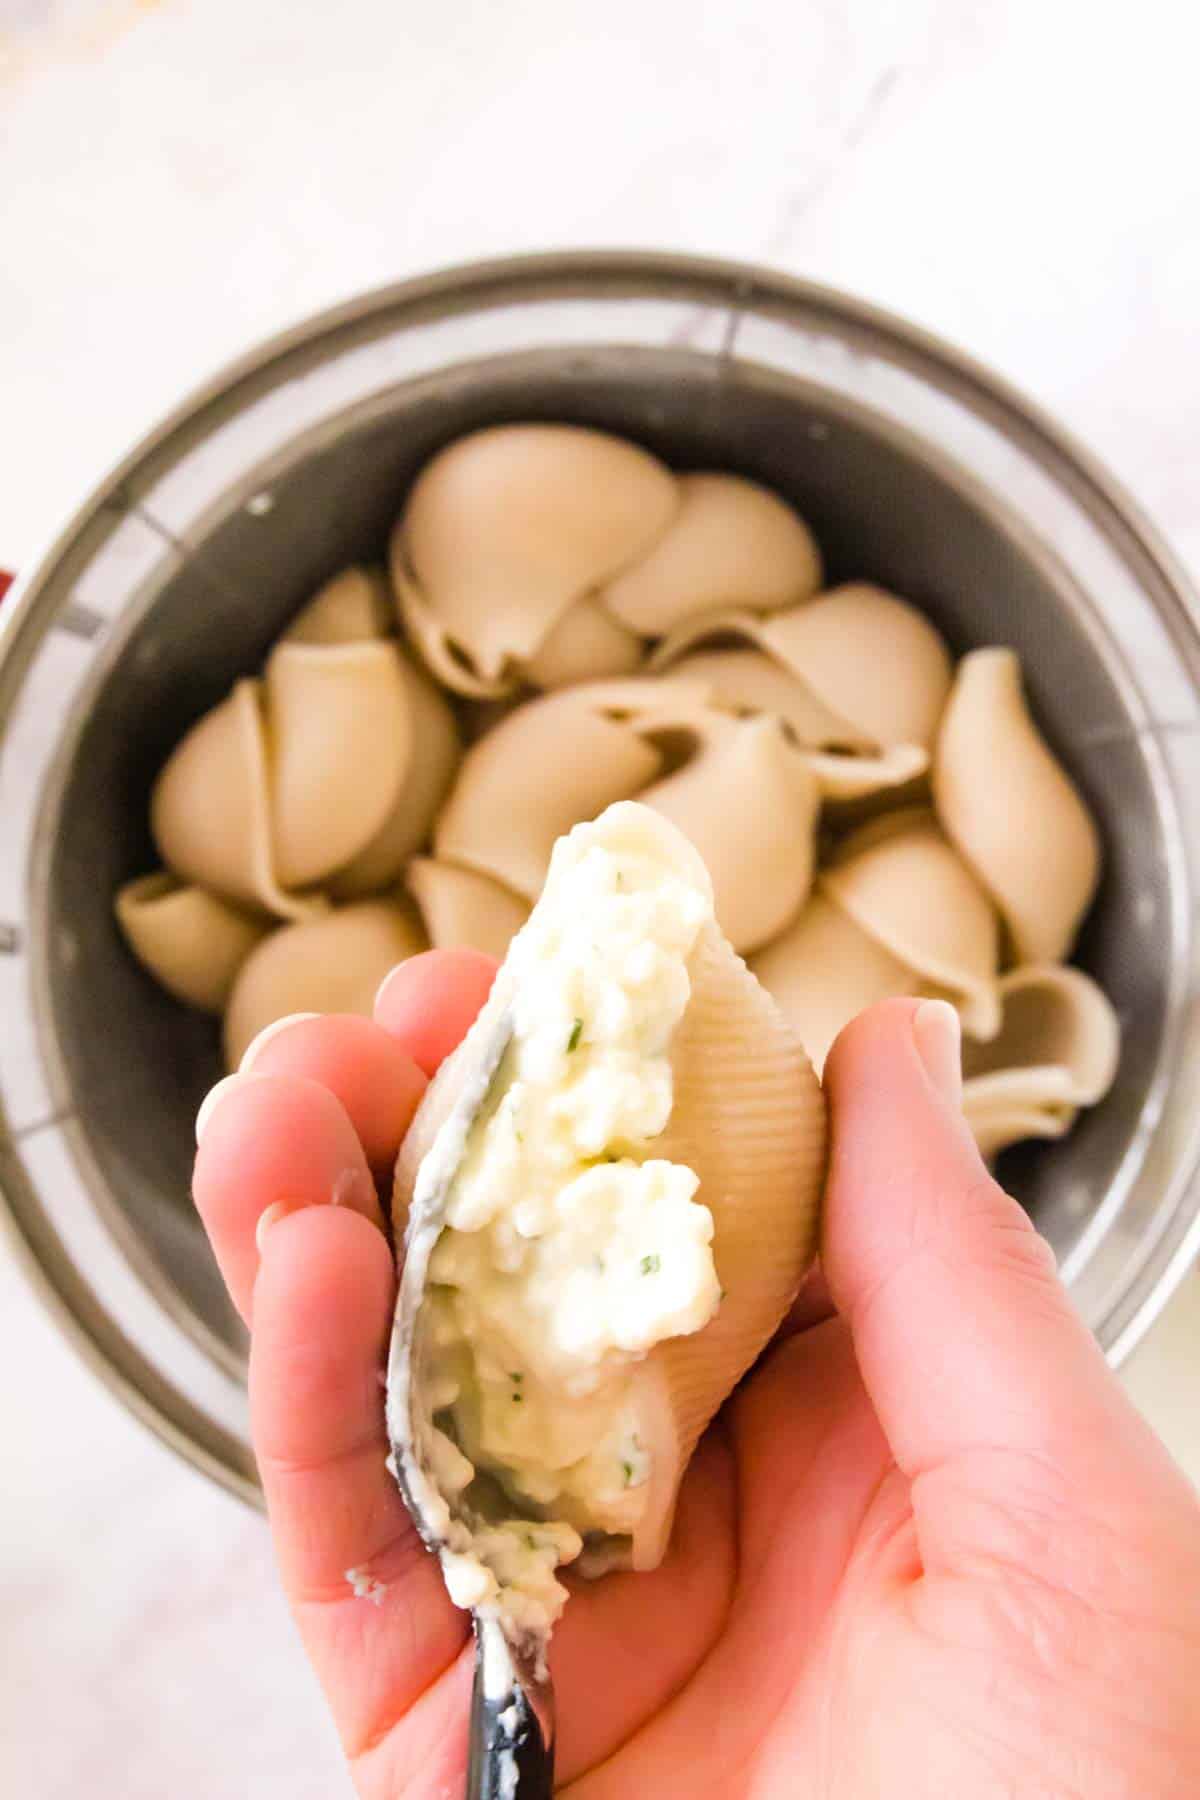 Overhead view of a hand filling a pasta shell with cheese, with a bowl of gluten-free jumbo pasta shells below.